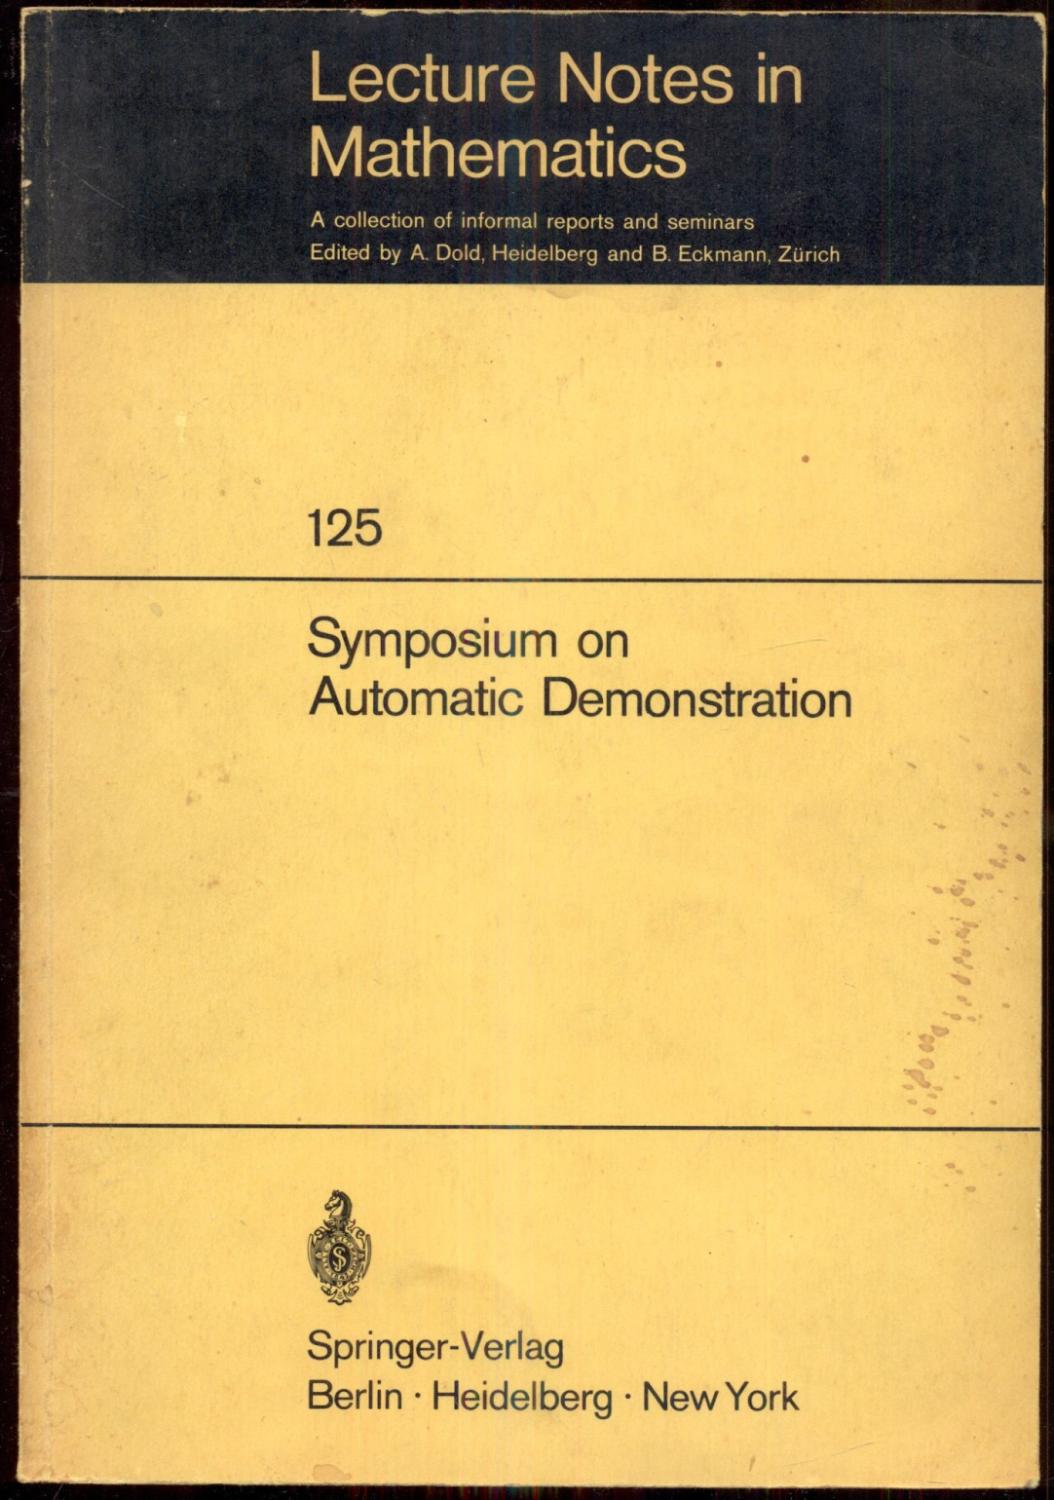 Symposium on Automatic Demonstration: Held at Versailles/France, December 1968 [= Lecture Notes in Mathematics; 125] - Laudet, M. - Lacombe, D. (eds.)